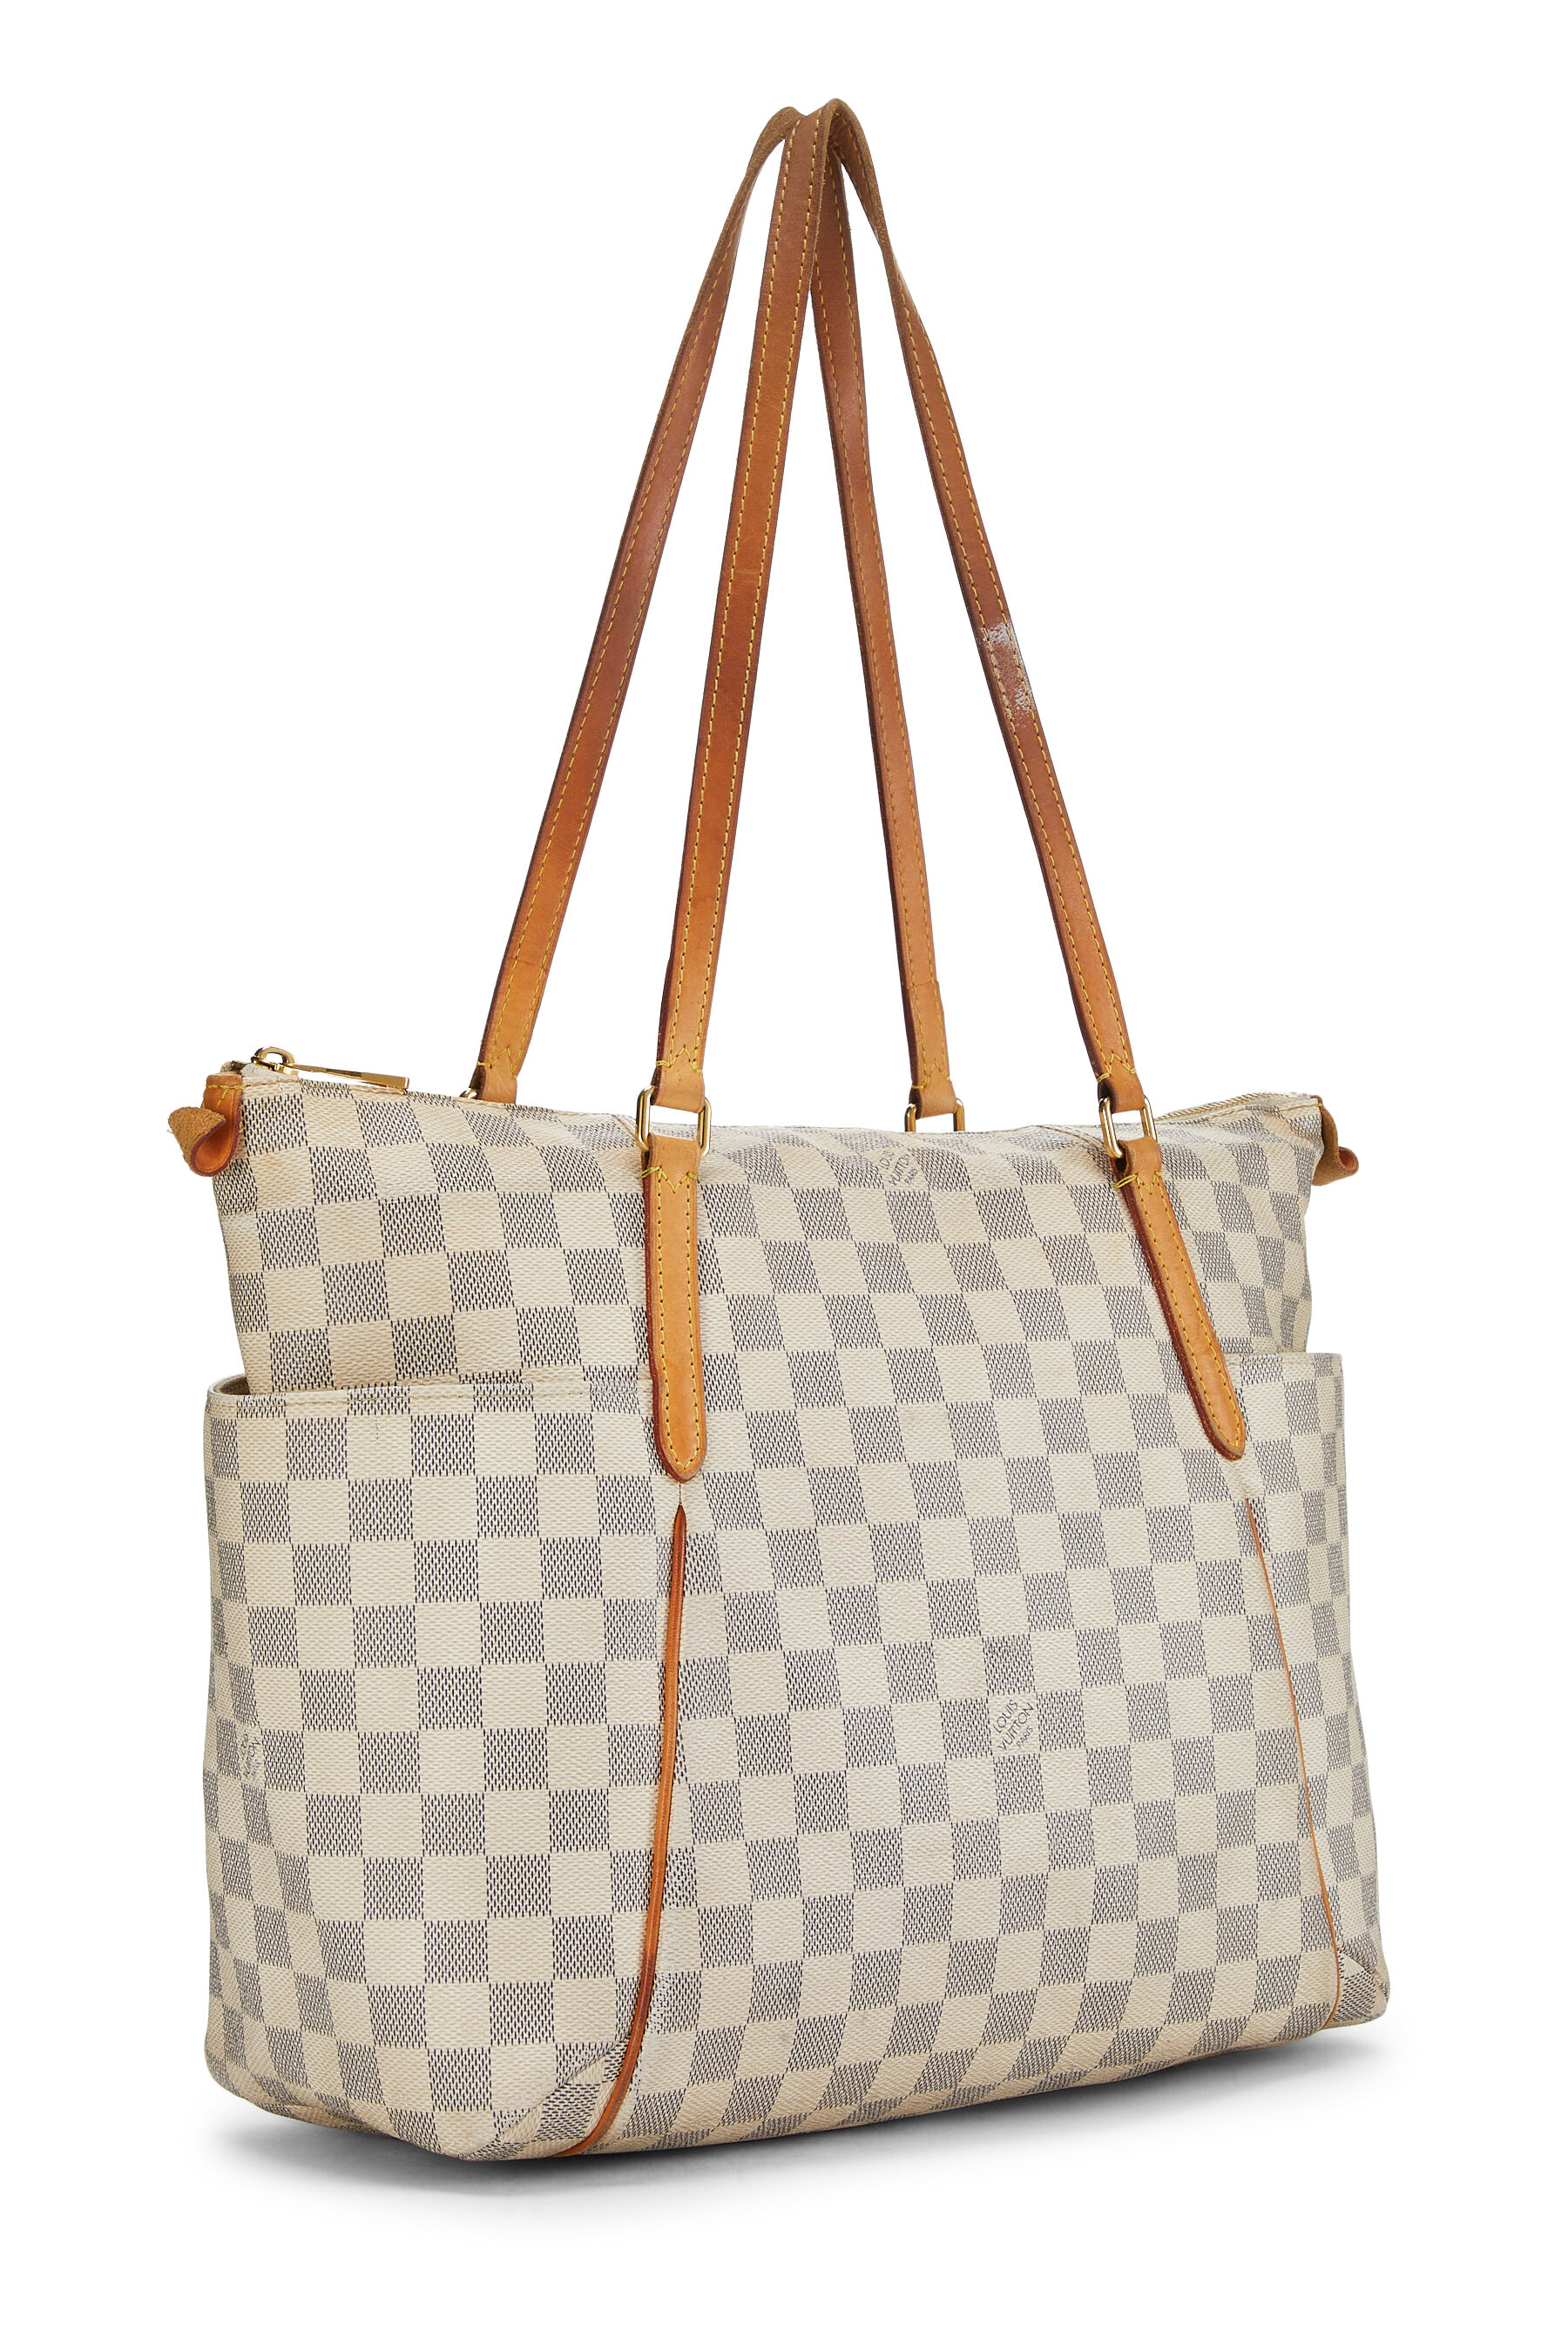 Help, what color is damier alma mm?